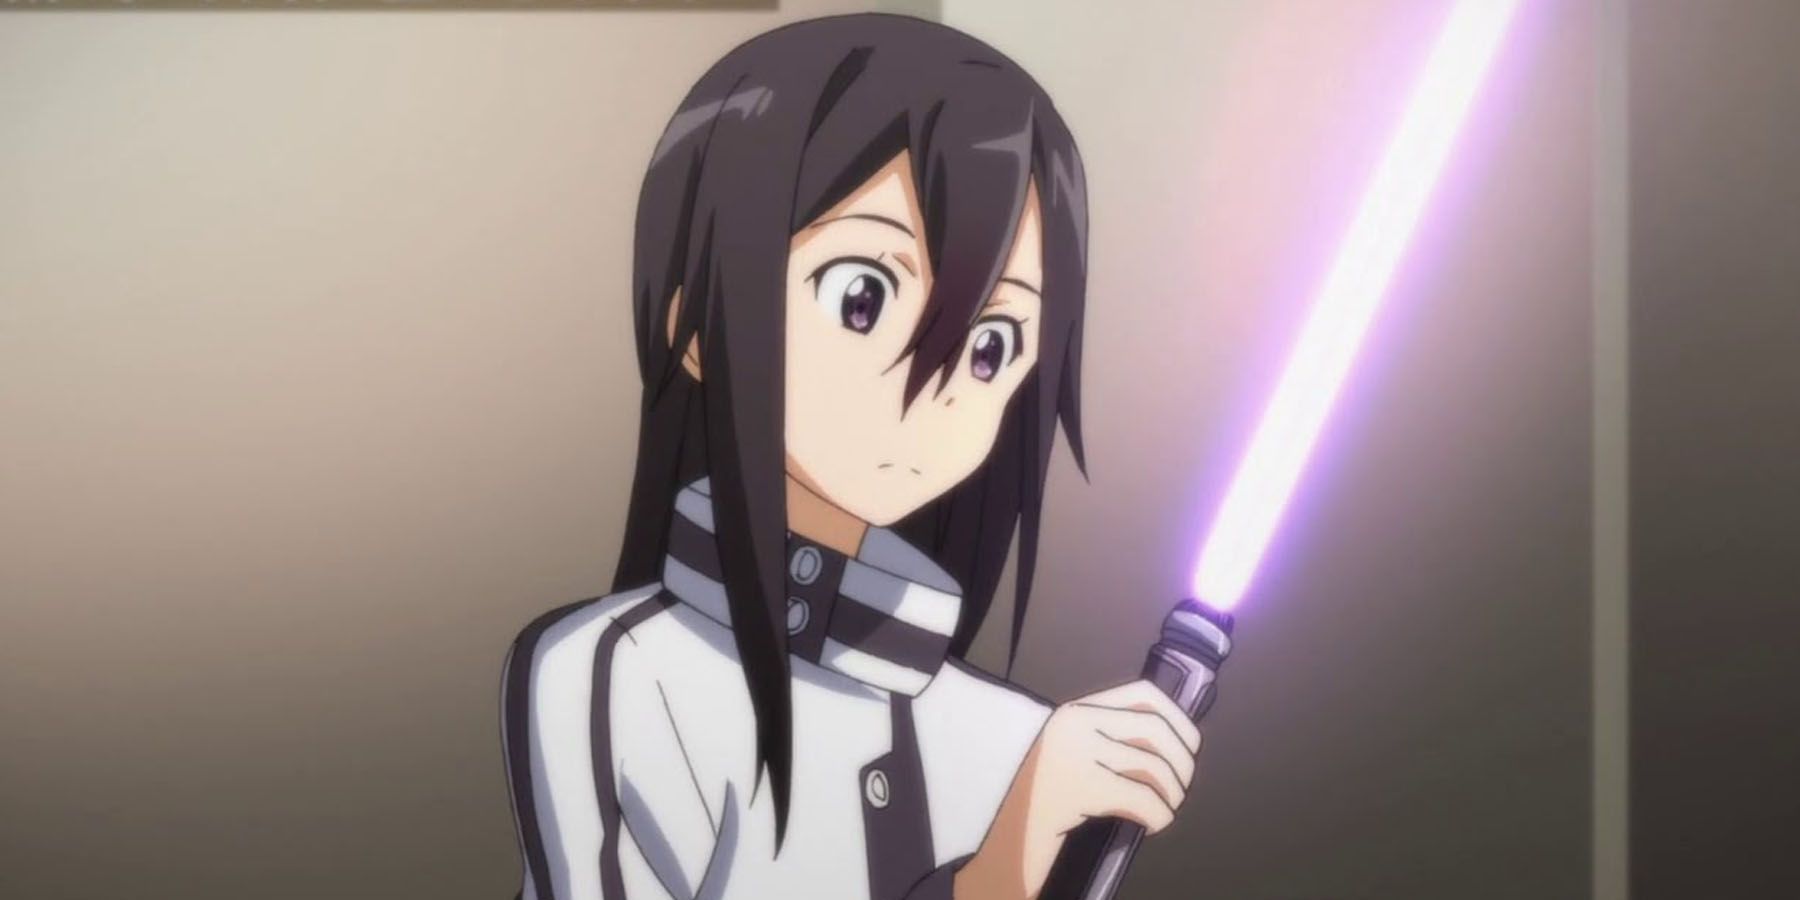 Kirito using a beam saber for the first time